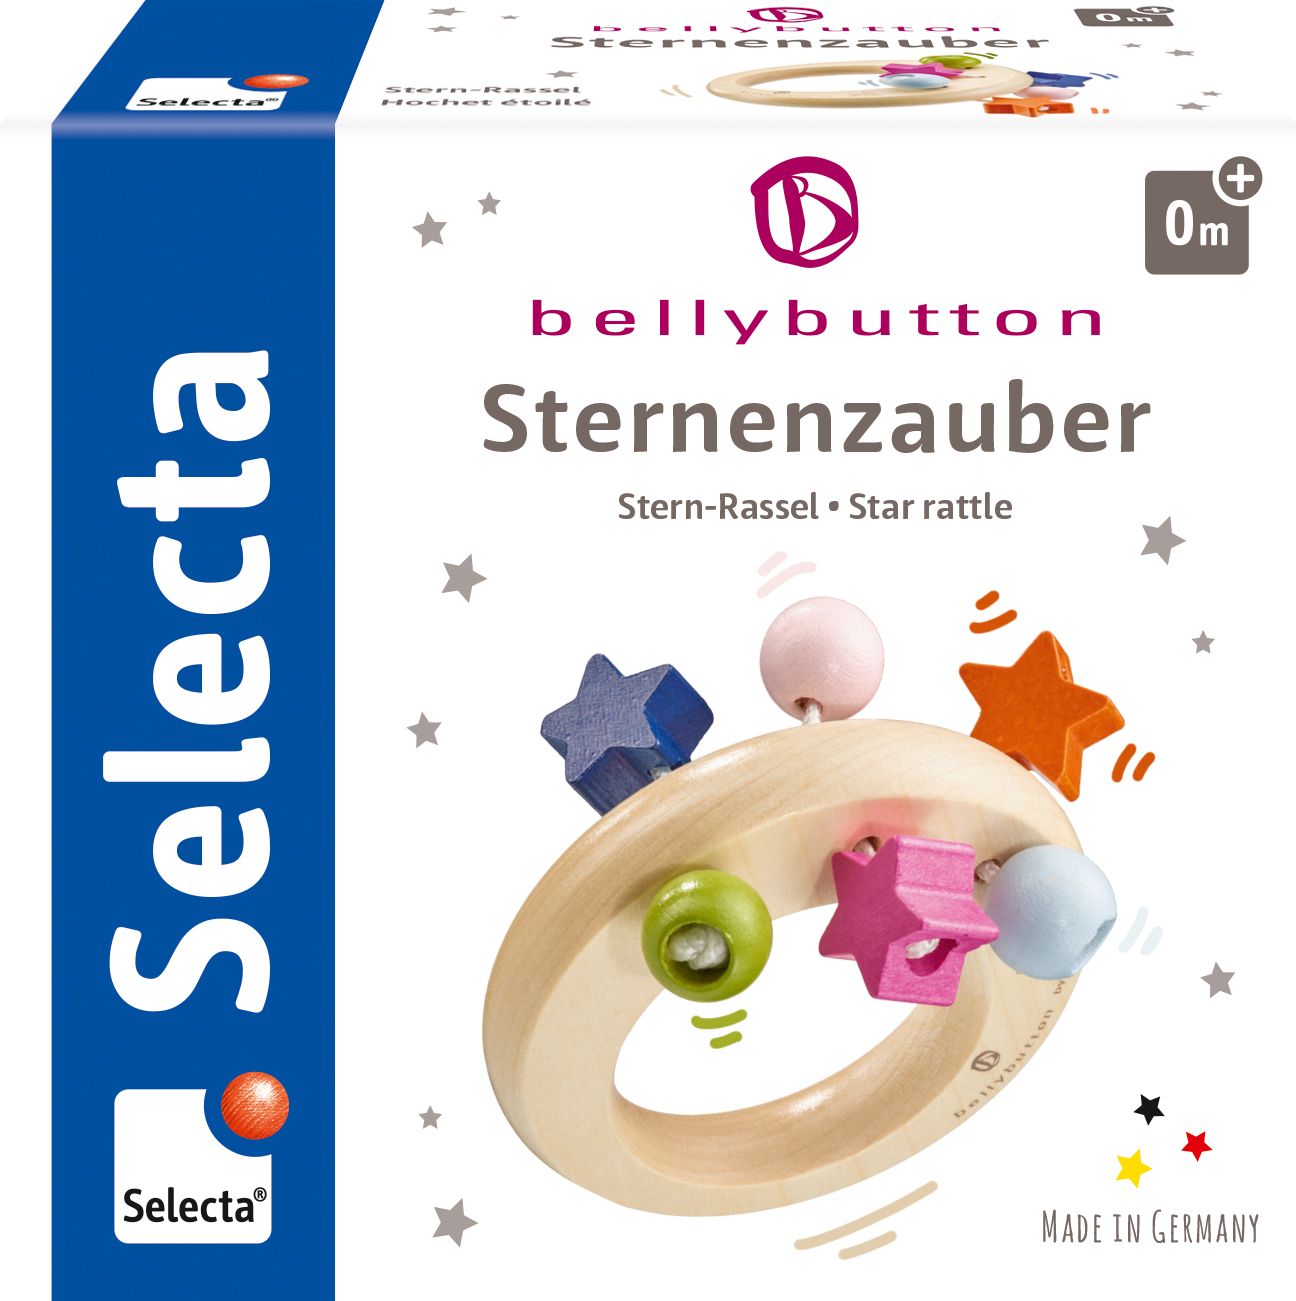 bellybutton by Selecta® - Sternenzauber, 8 cm